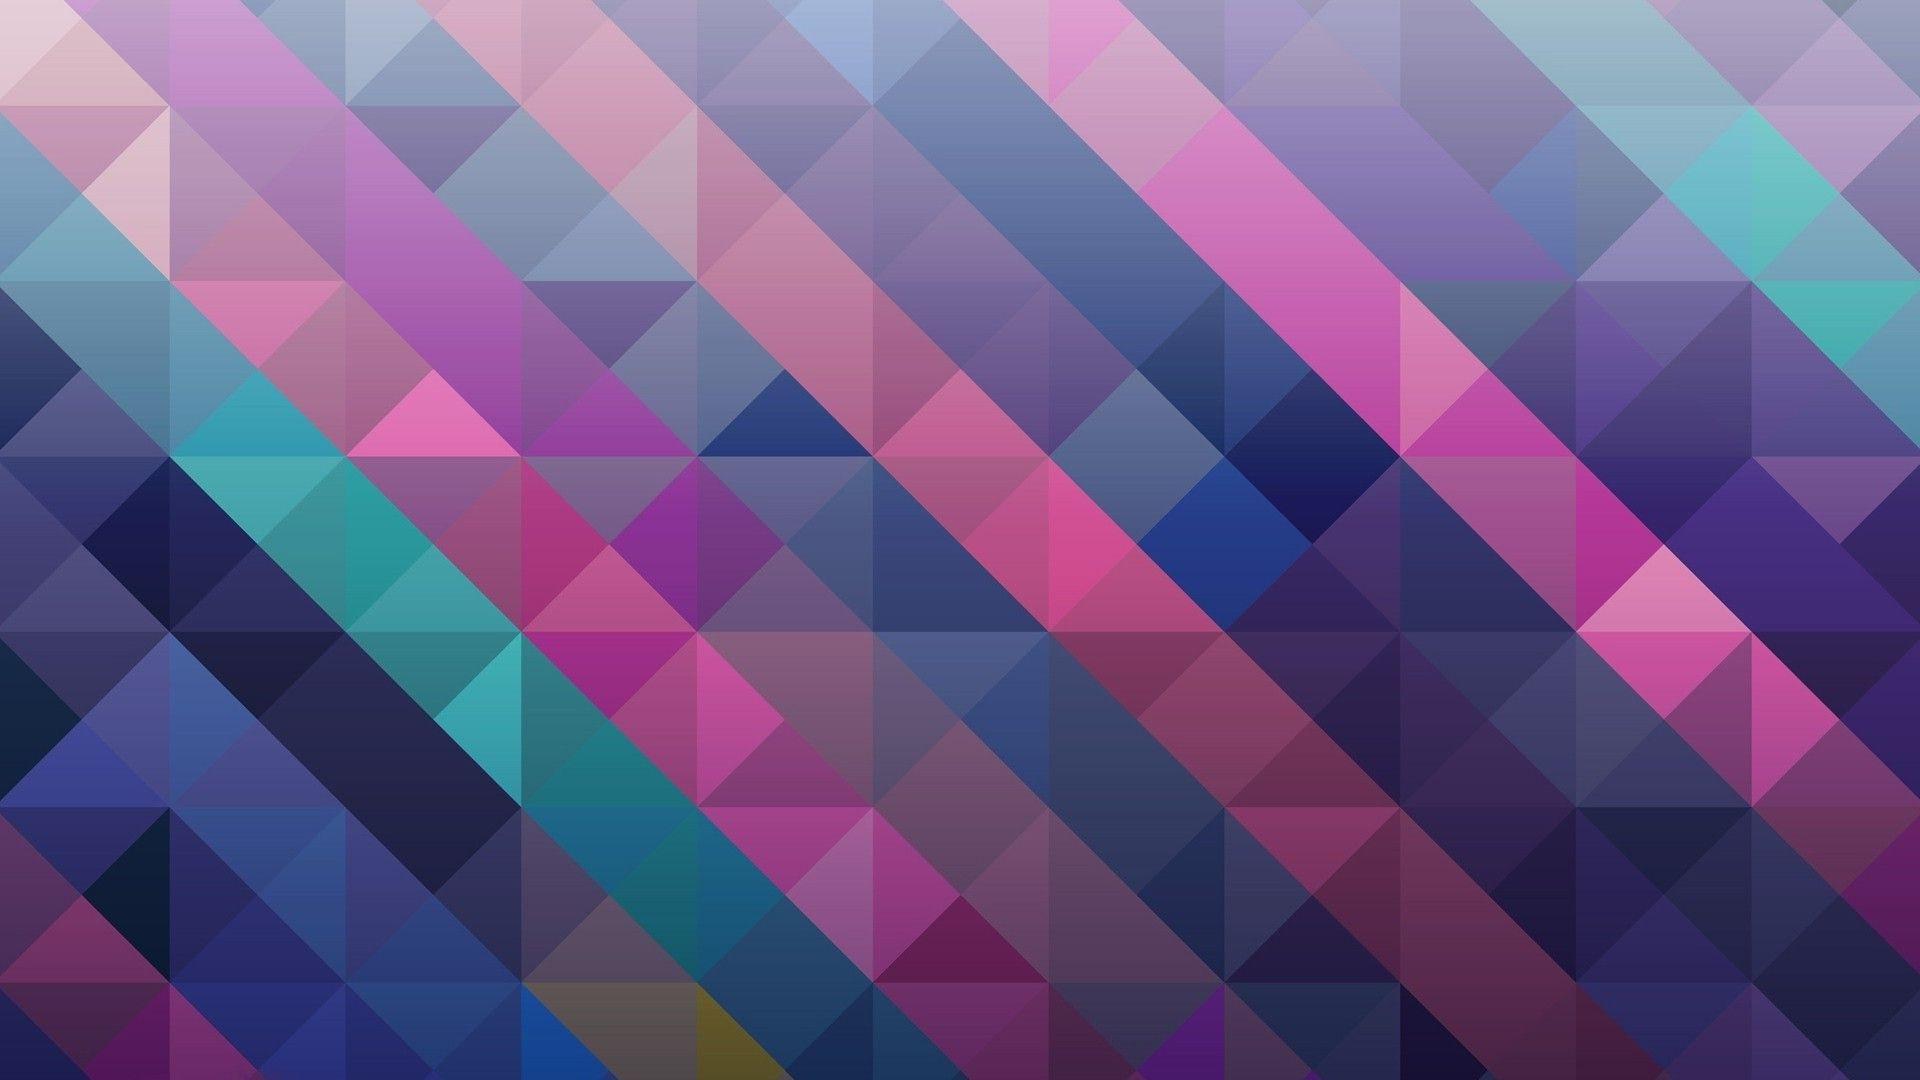 Wallpaper, colorful, digital art, abstract, minimalism, purple, symmetry, triangle, pattern, geometry, texture, square, lines, magenta, mosaic, angle, design, line, 1920x1080 px, computer wallpaper 1920x1080